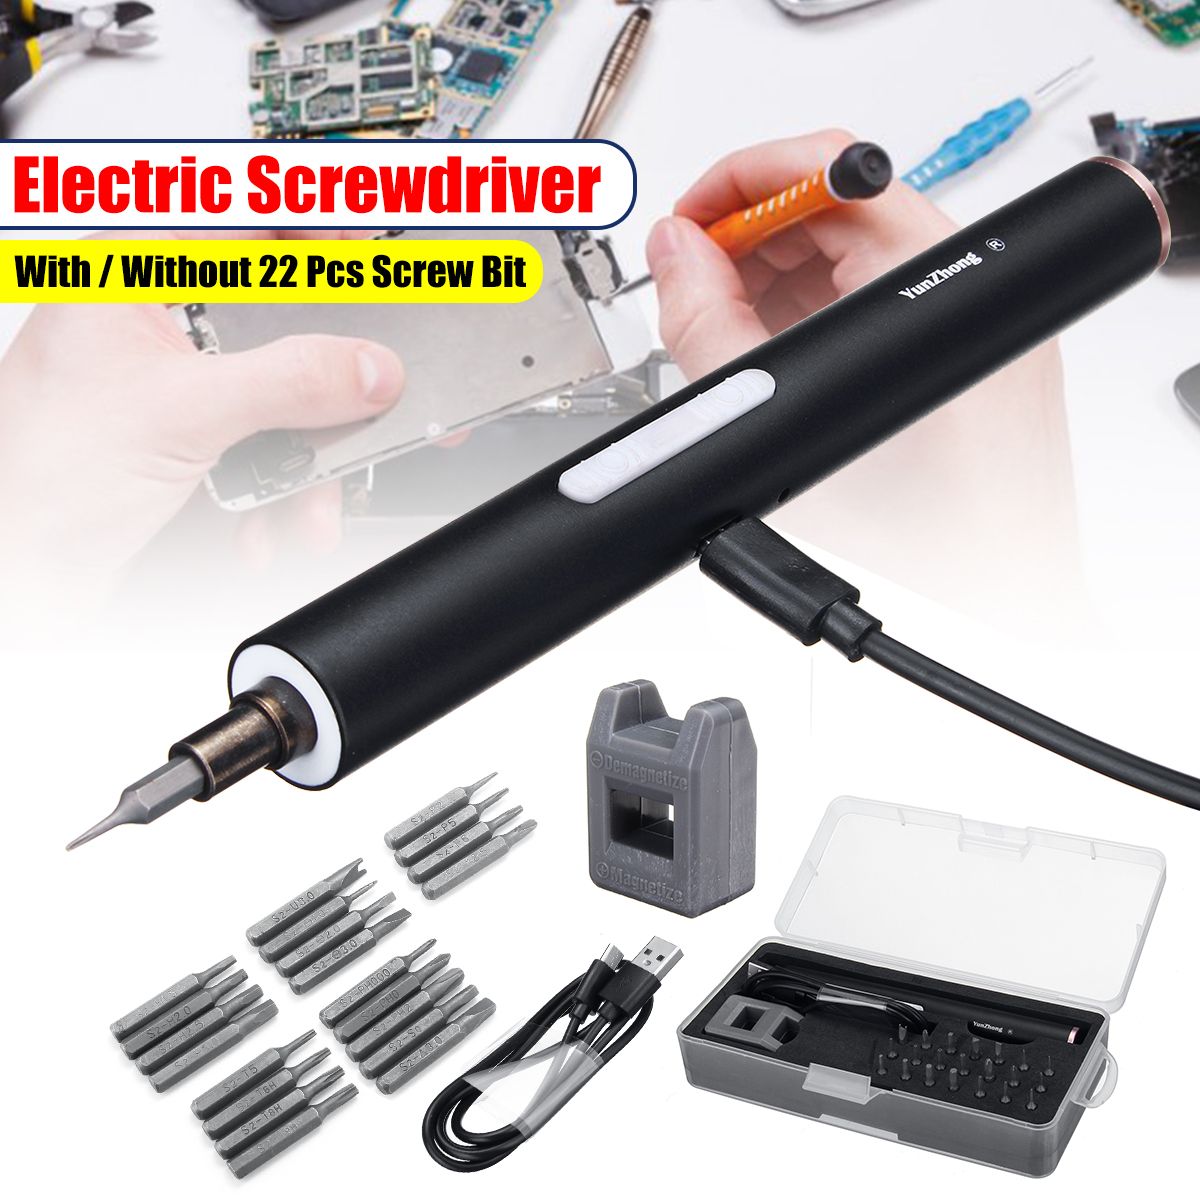 36V-Cordless-Electric-Screwdriver-Power-Tools-800mAh-Rechargeable-Lithium-Battery-Mini-Portable-USB--1465236